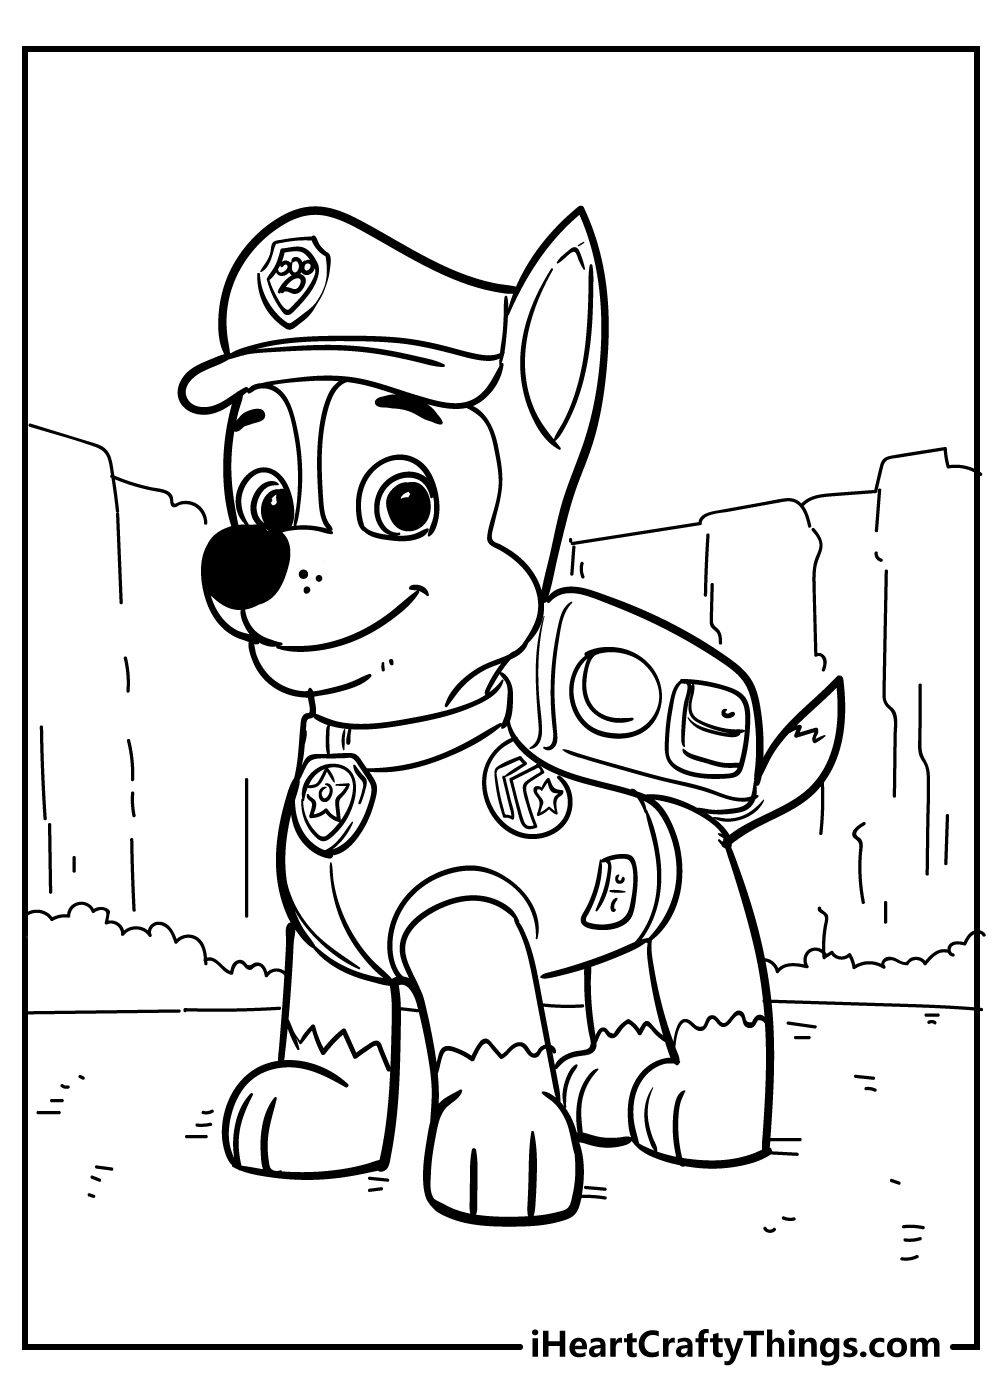 Paw Patrol Coloring Pages FREE Printable 104